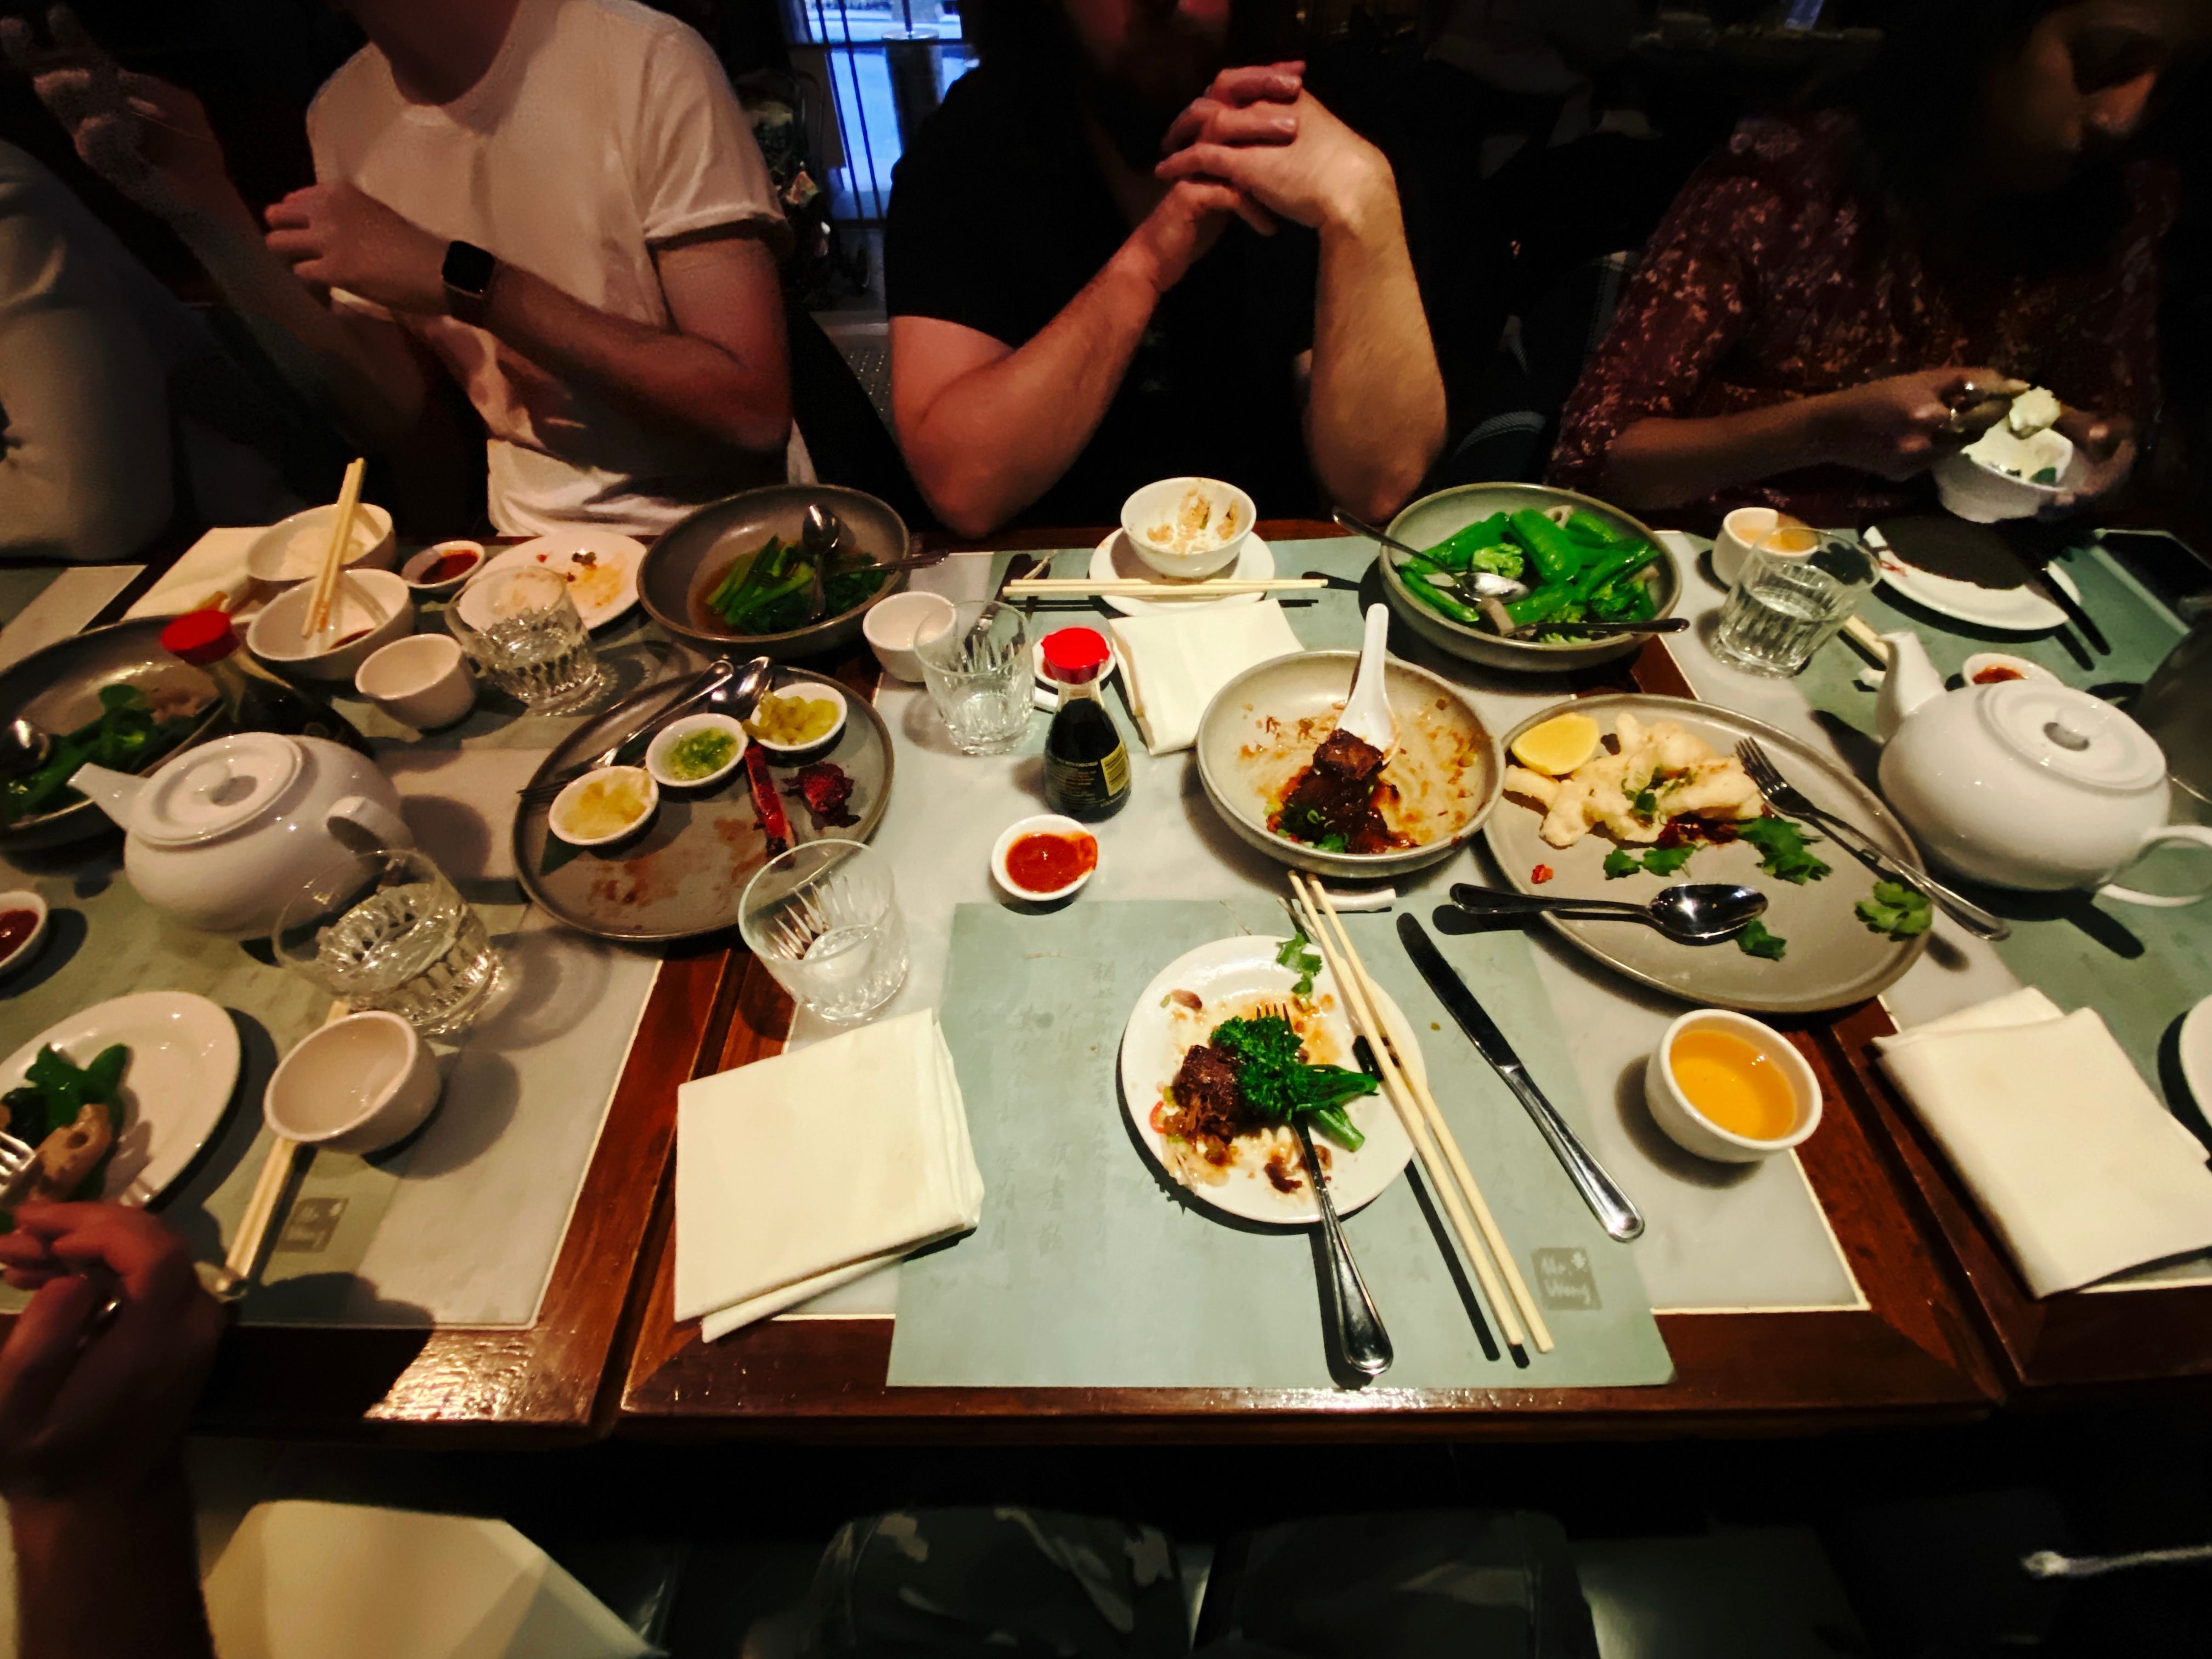 A wide-angle photo of a bunch of mostly empty bowls and plates from a Chinese restaurant sitting on a table.